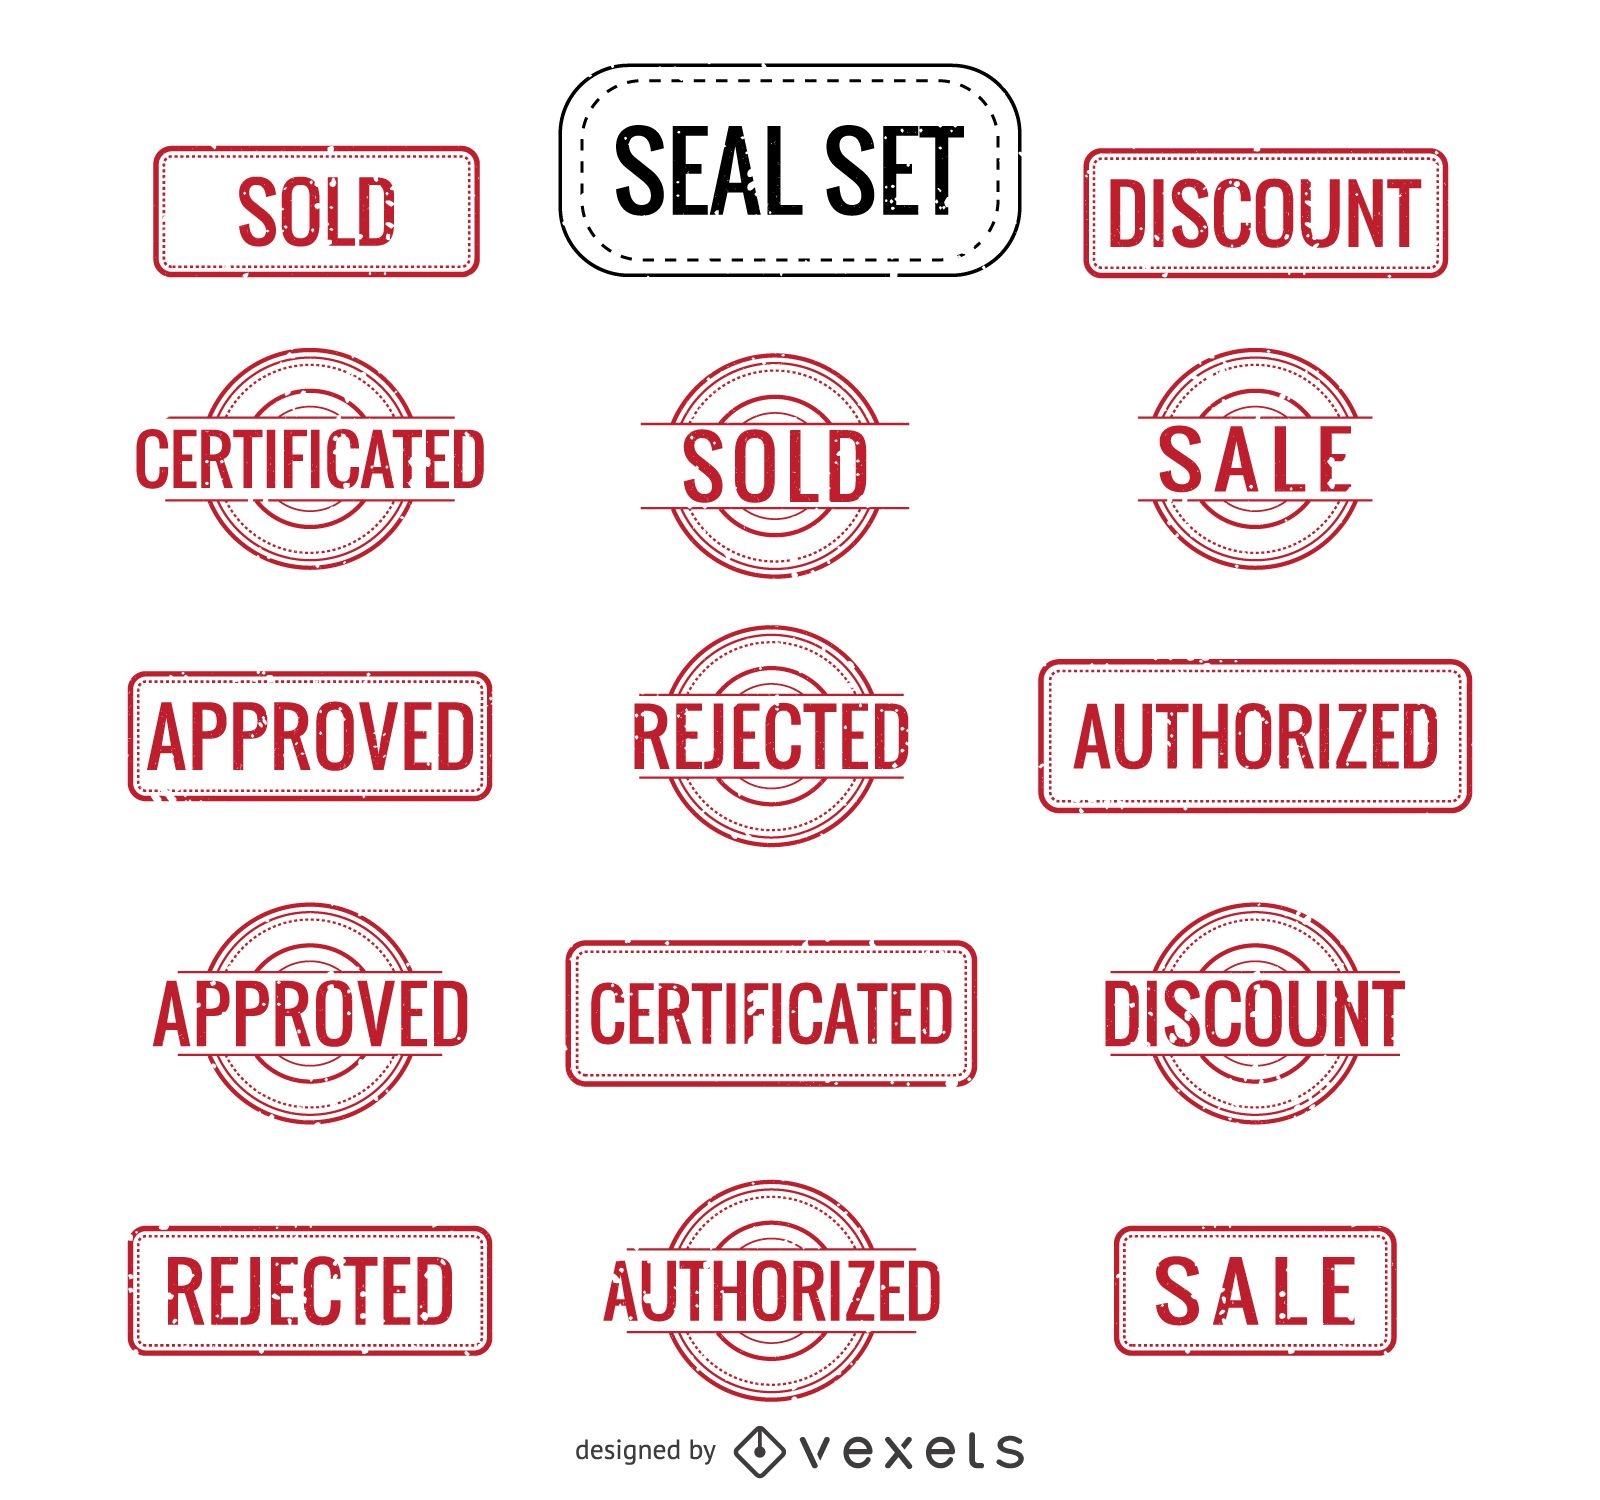 Sale Authorized Rejected and more seals set